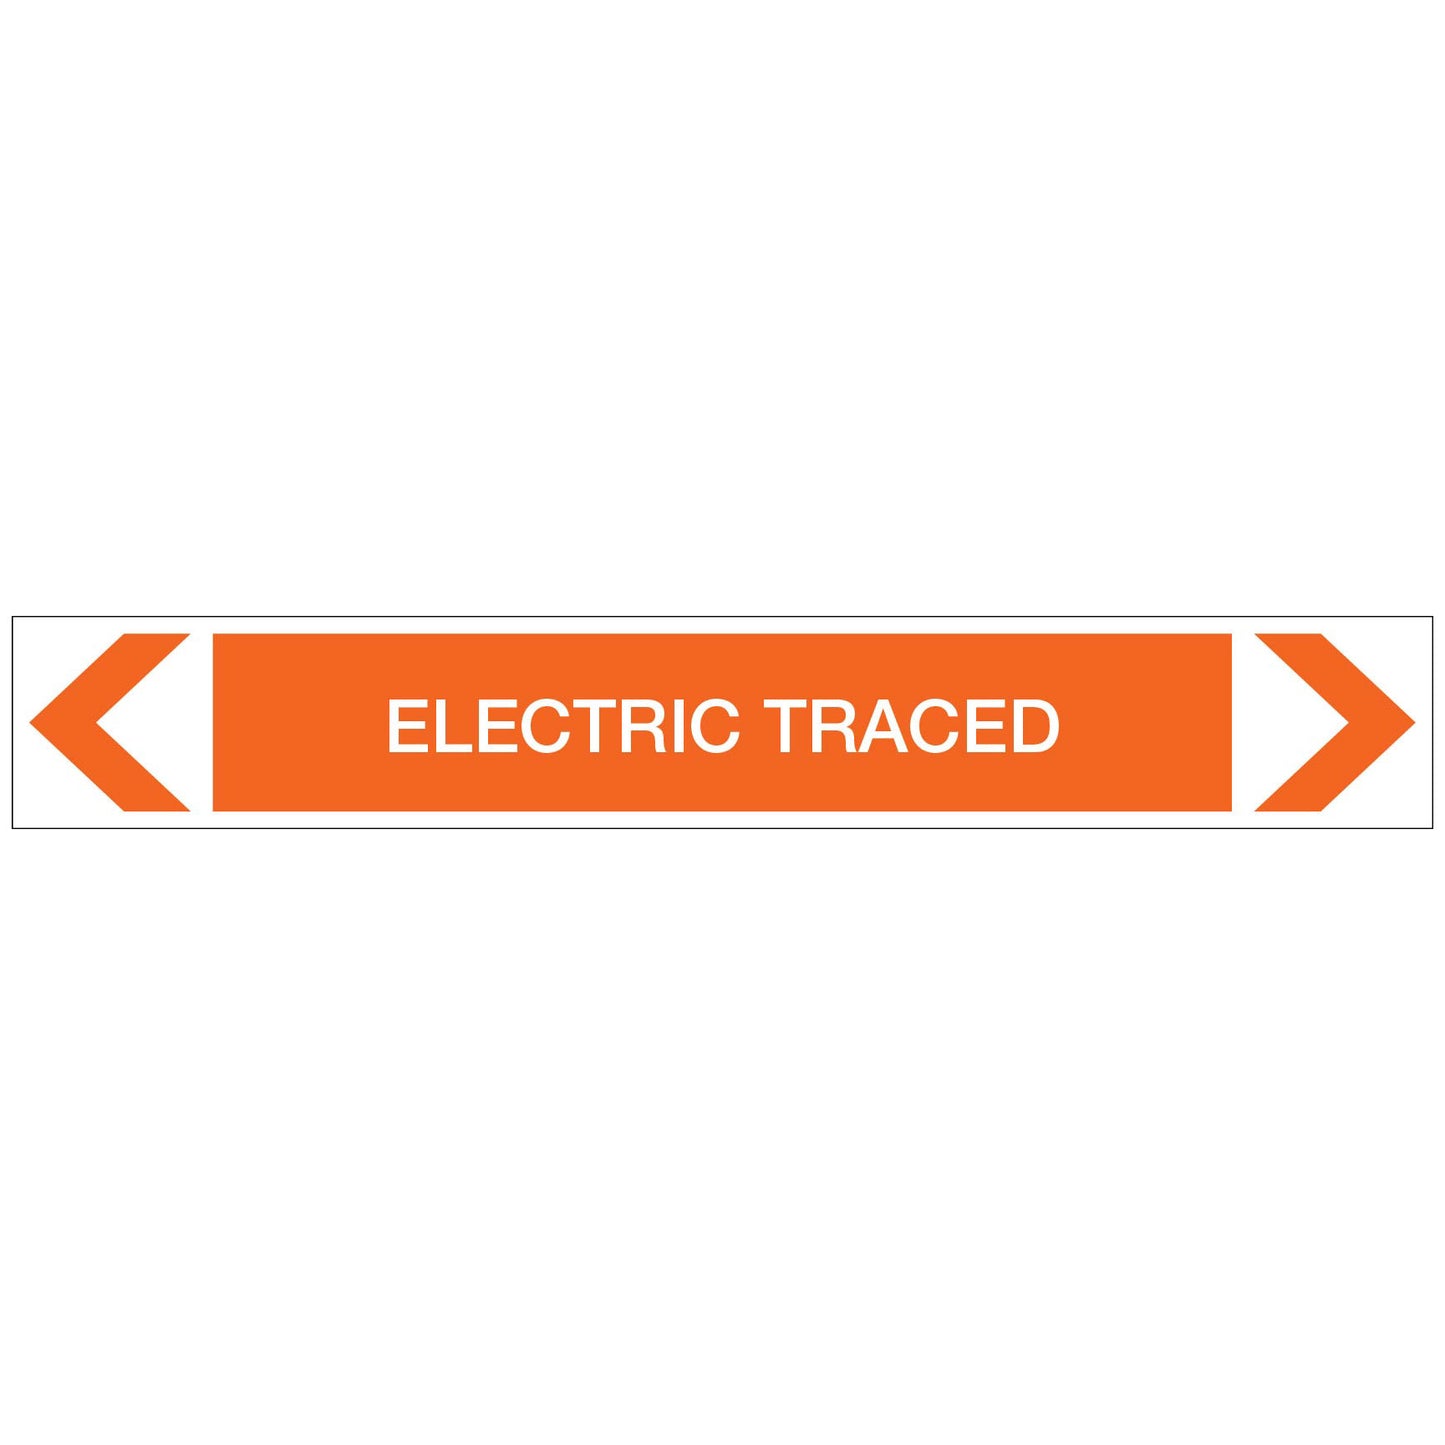 Electrical - Electric Traced - Pipe Marker Sticker